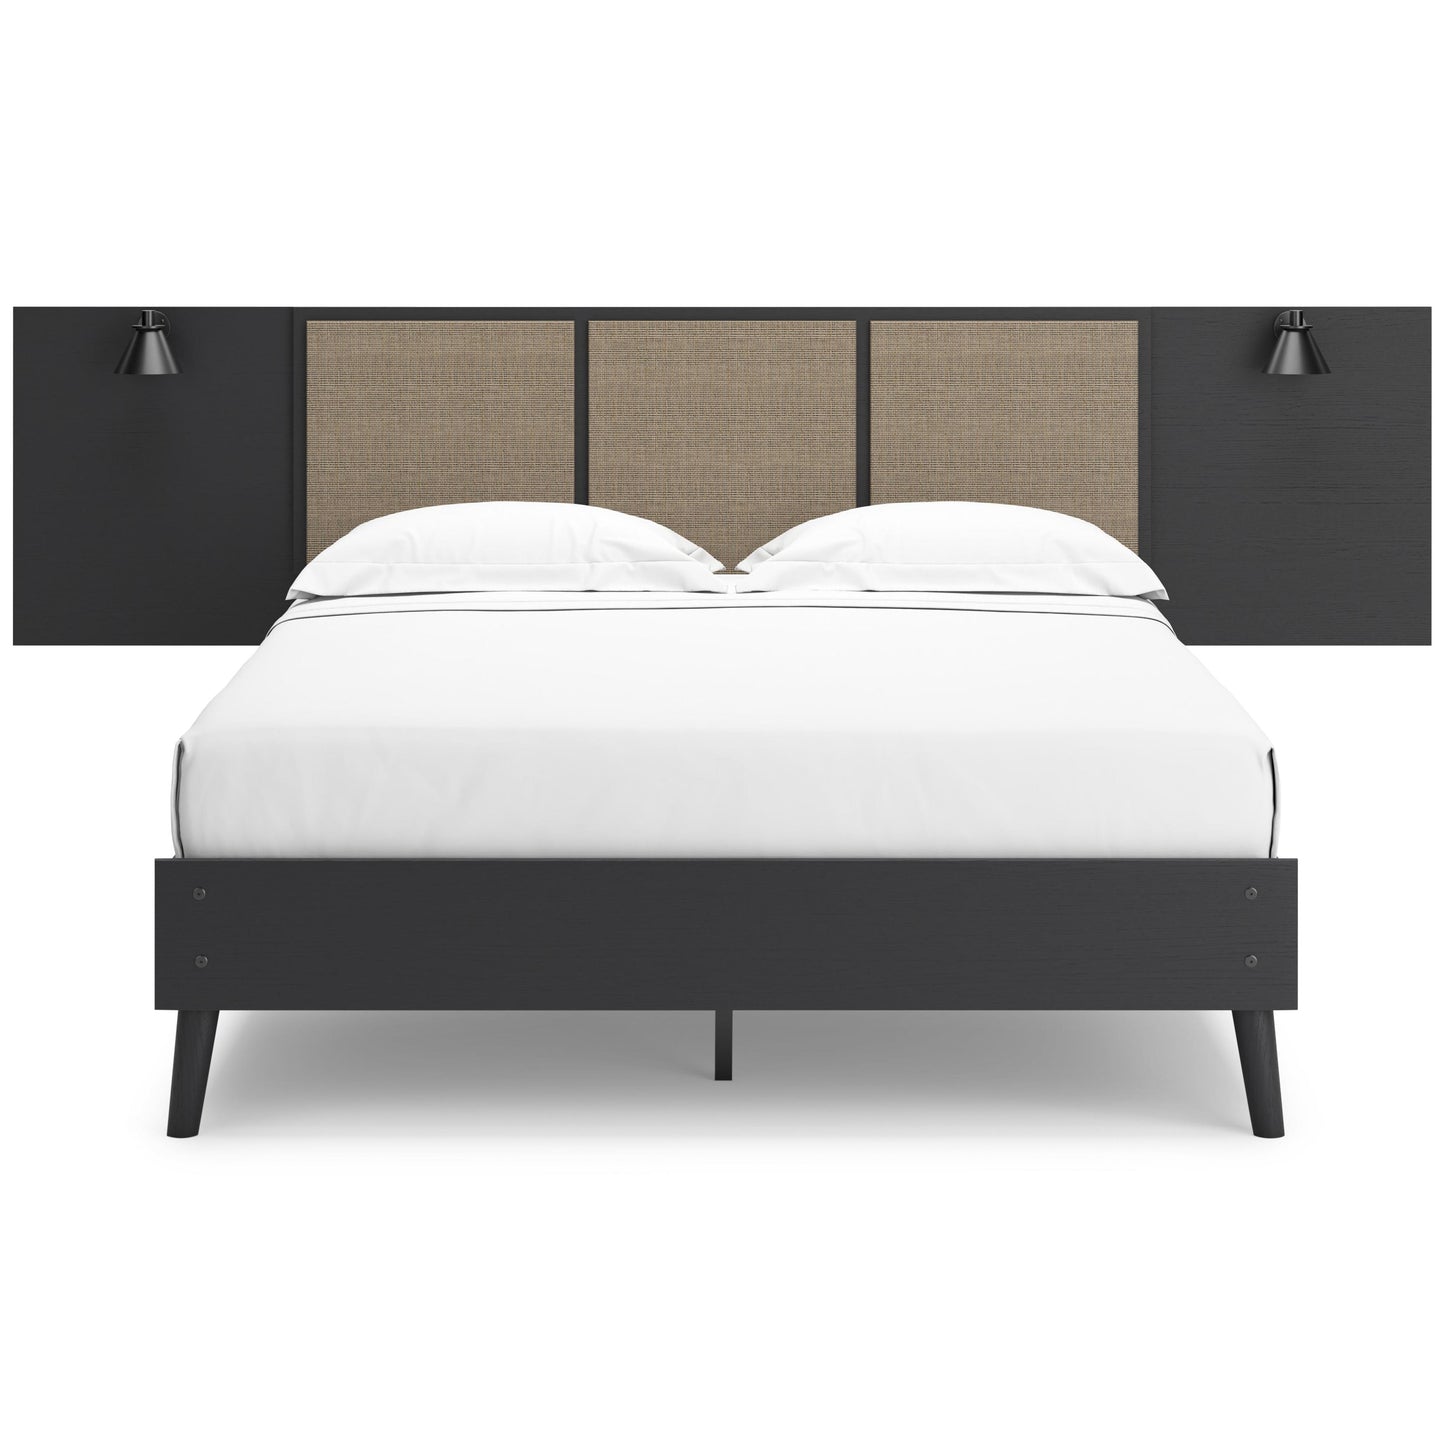 Signature Design by Ashley Charlang Queen Panel Bed EB1198-157/EB1198-113/EB1198-102 IMAGE 2